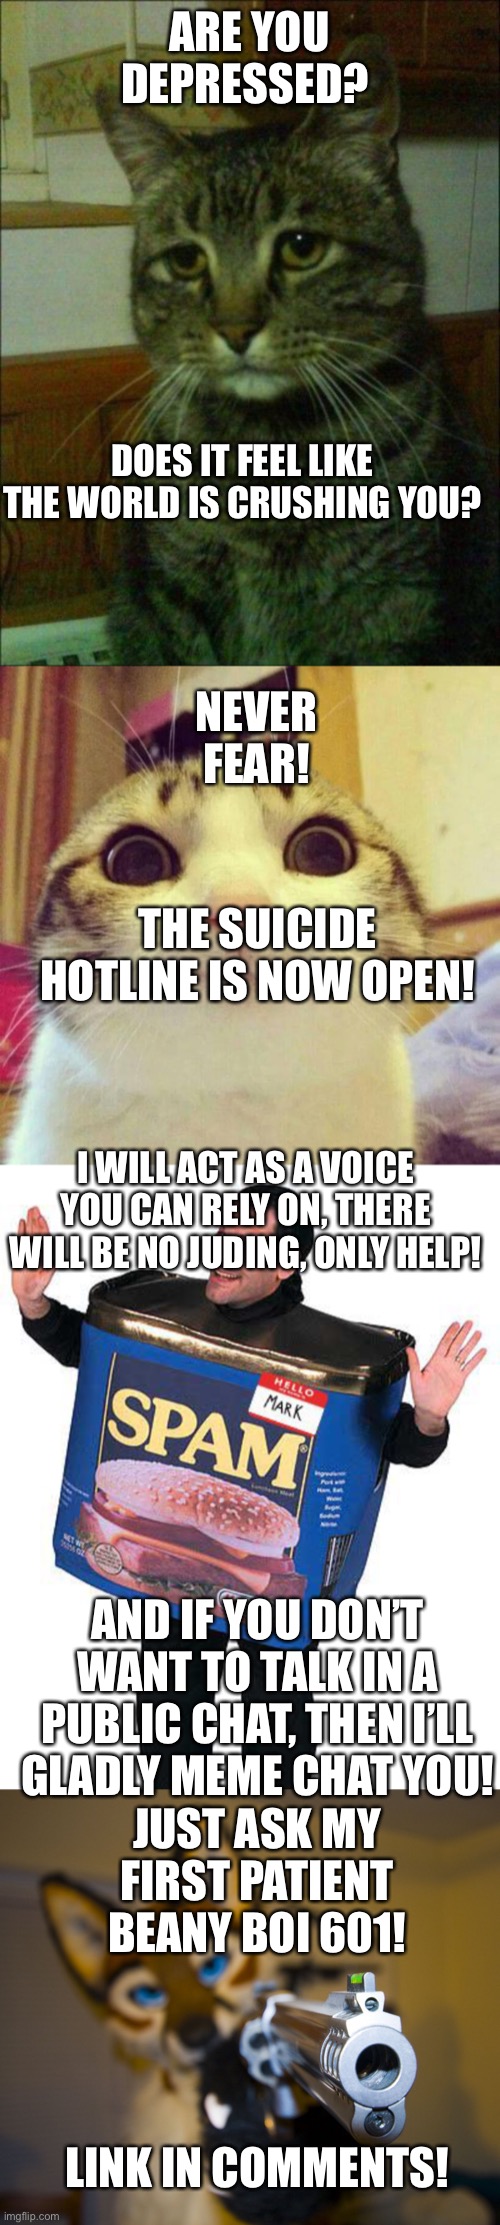 Trust me | ARE YOU DEPRESSED? DOES IT FEEL LIKE THE WORLD IS CRUSHING YOU? NEVER FEAR! THE SUICIDE HOTLINE IS NOW OPEN! I WILL ACT AS A VOICE YOU CAN RELY ON, THERE WILL BE NO JUDING, ONLY HELP! AND IF YOU DON’T WANT TO TALK IN A PUBLIC CHAT, THEN I’LL GLADLY MEME CHAT YOU! JUST ASK MY FIRST PATIENT BEANY BOI 601! LINK IN COMMENTS! | image tagged in memes,depressed cat,smiling cat,spam,furry with gun | made w/ Imgflip meme maker